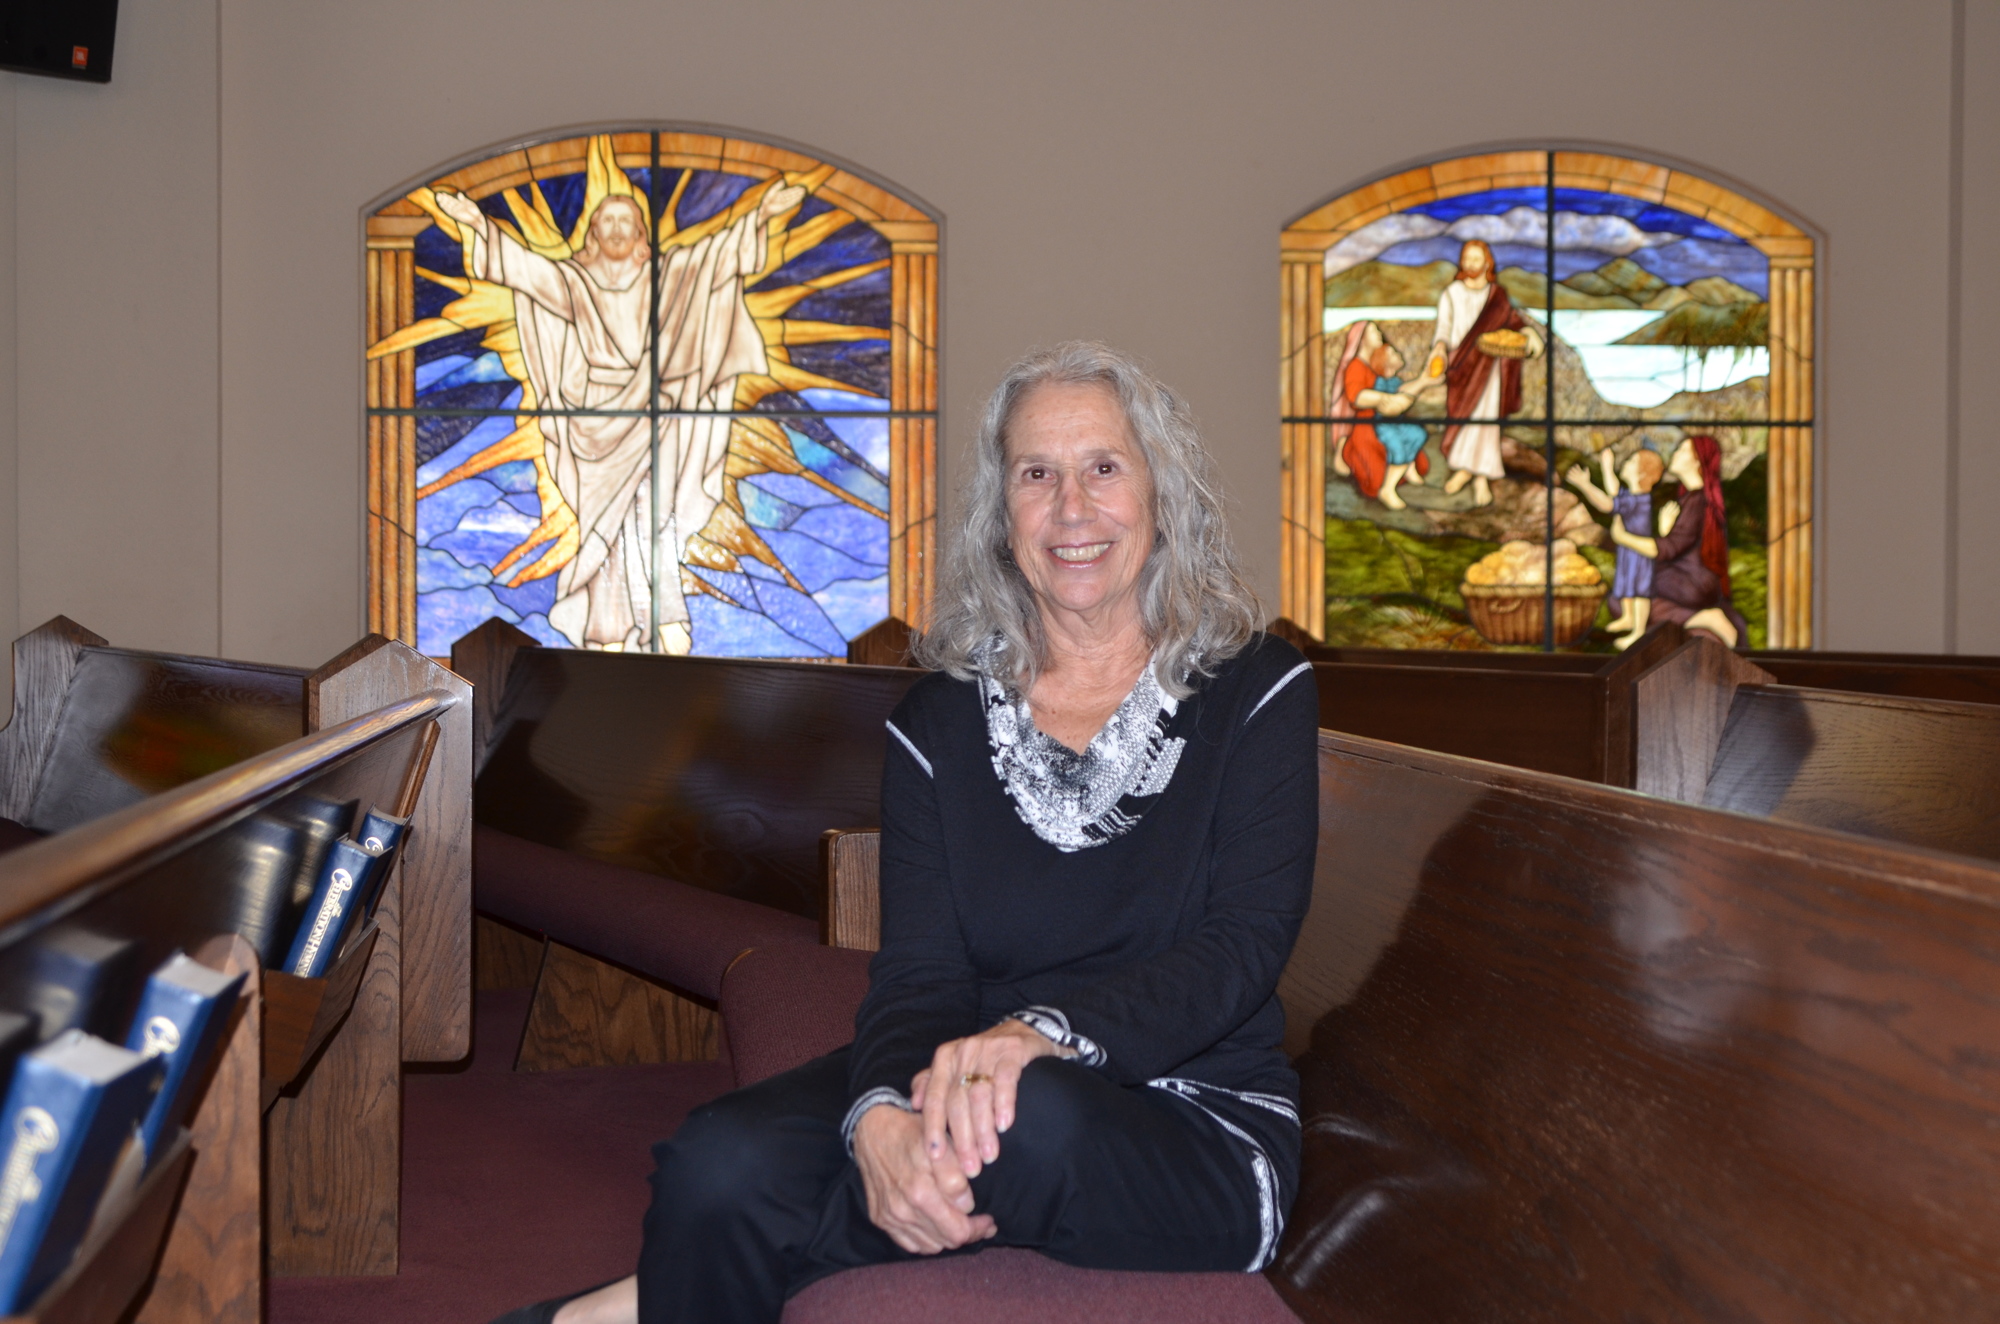 Joan Bailey might be retiring from her position at Edgewood, but she intends to continue volunteering her time there.